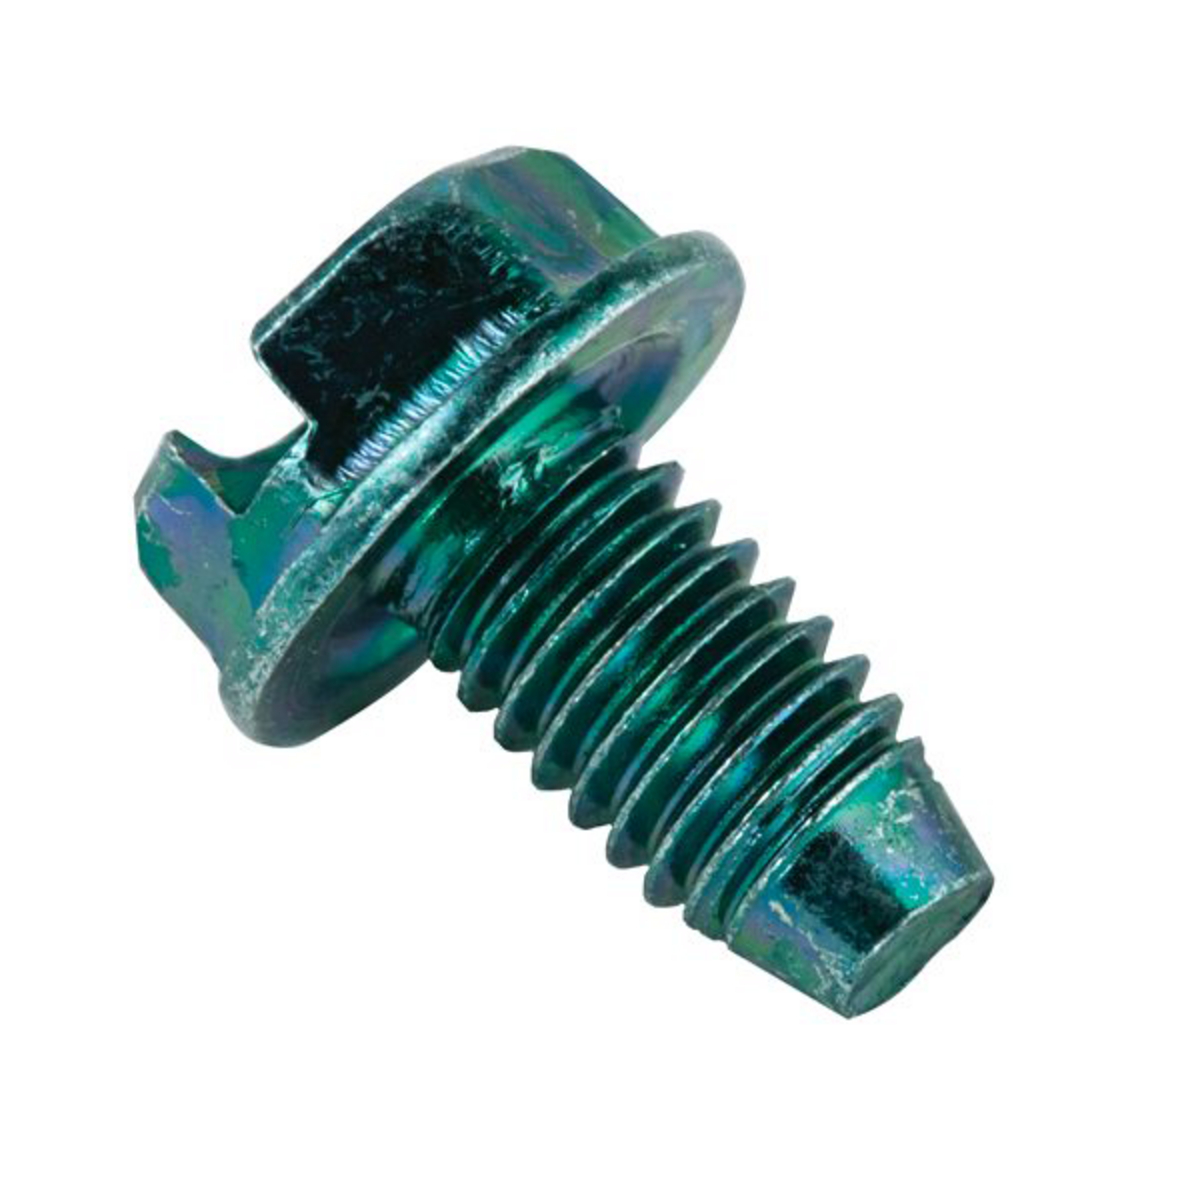 Ground Screws and Clips, Slotted head green dye finish 3/8 In. groundscrew for 10-32 tapped hole, clam shell package (100 pc. per clamshell)